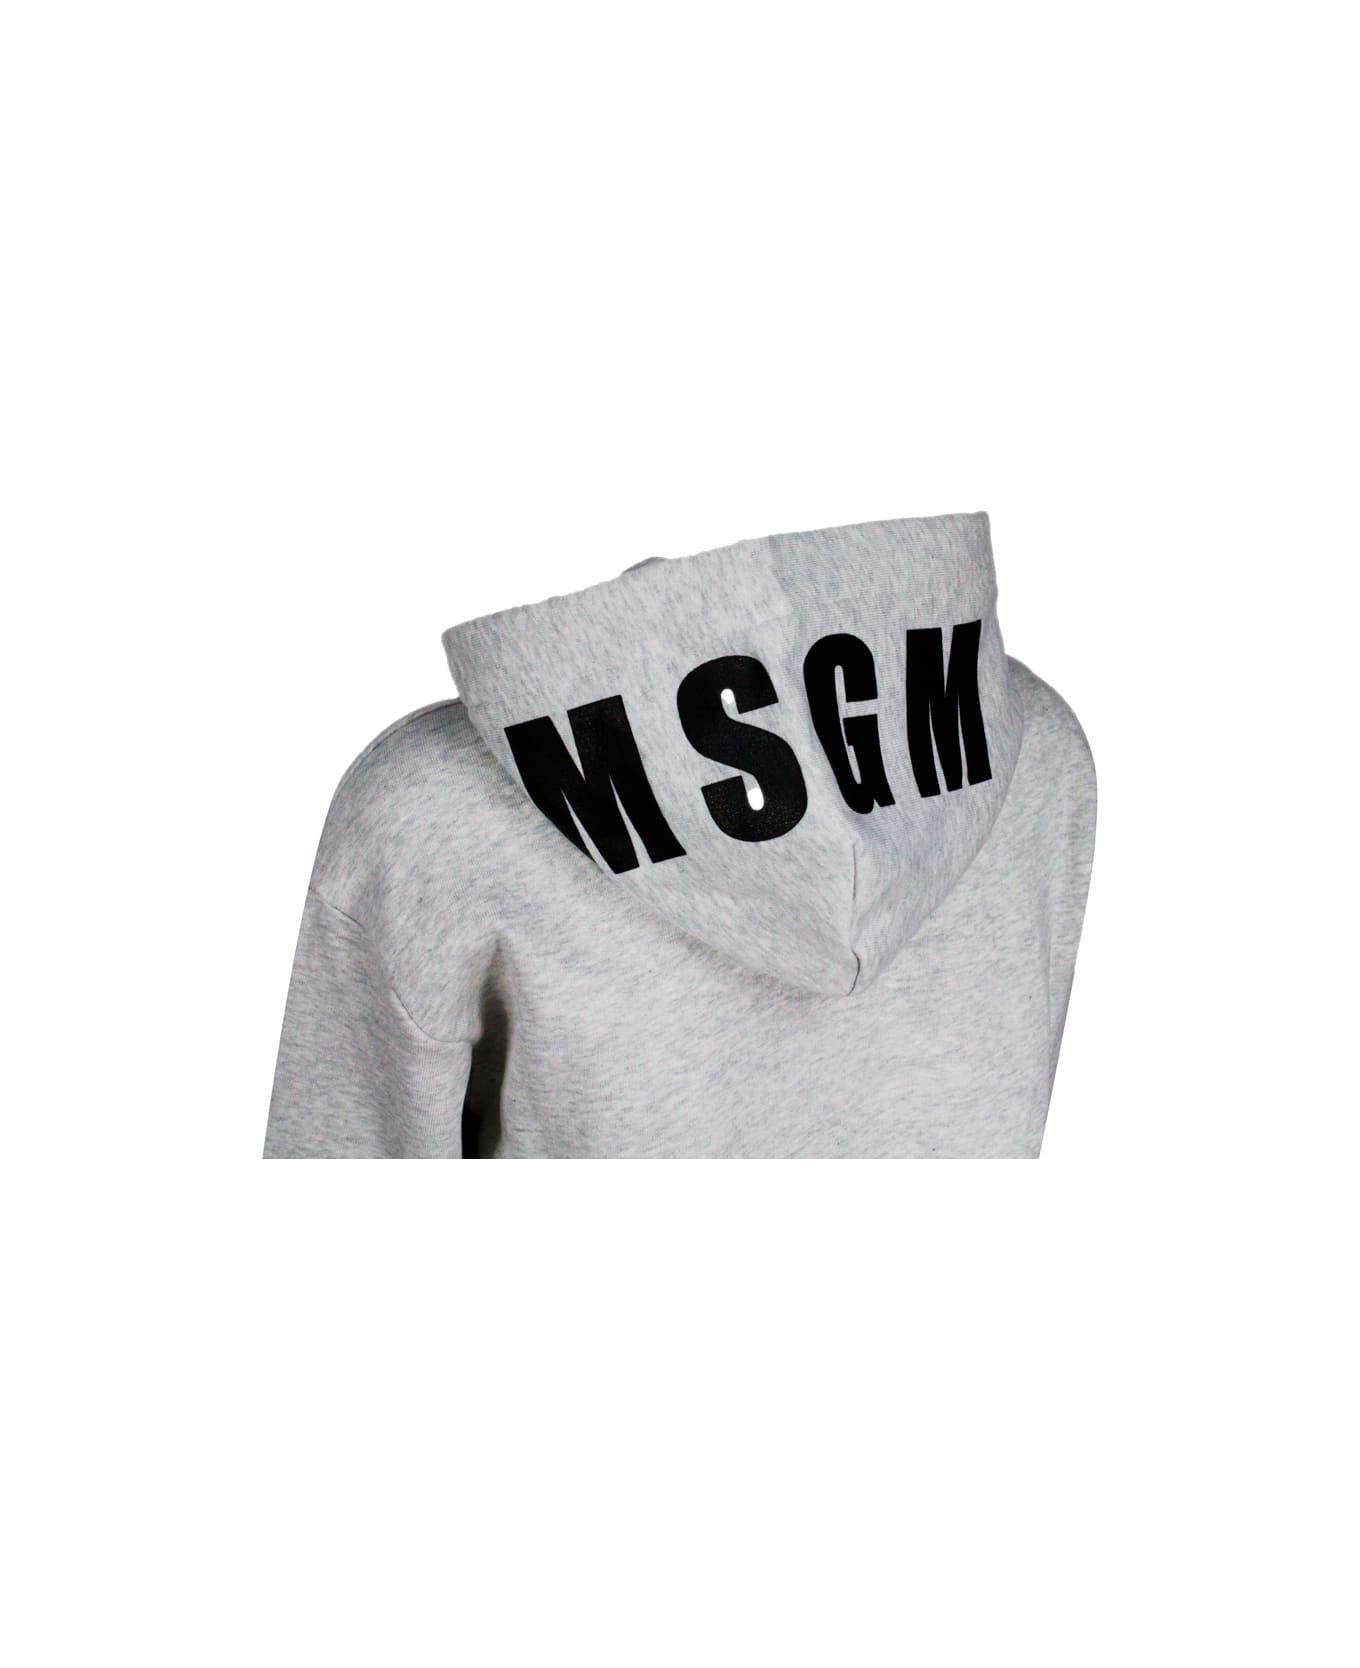 MSGM Cotton Sweatshirt With Hood With Side Pockets, Zip Closure And Writing - Grey